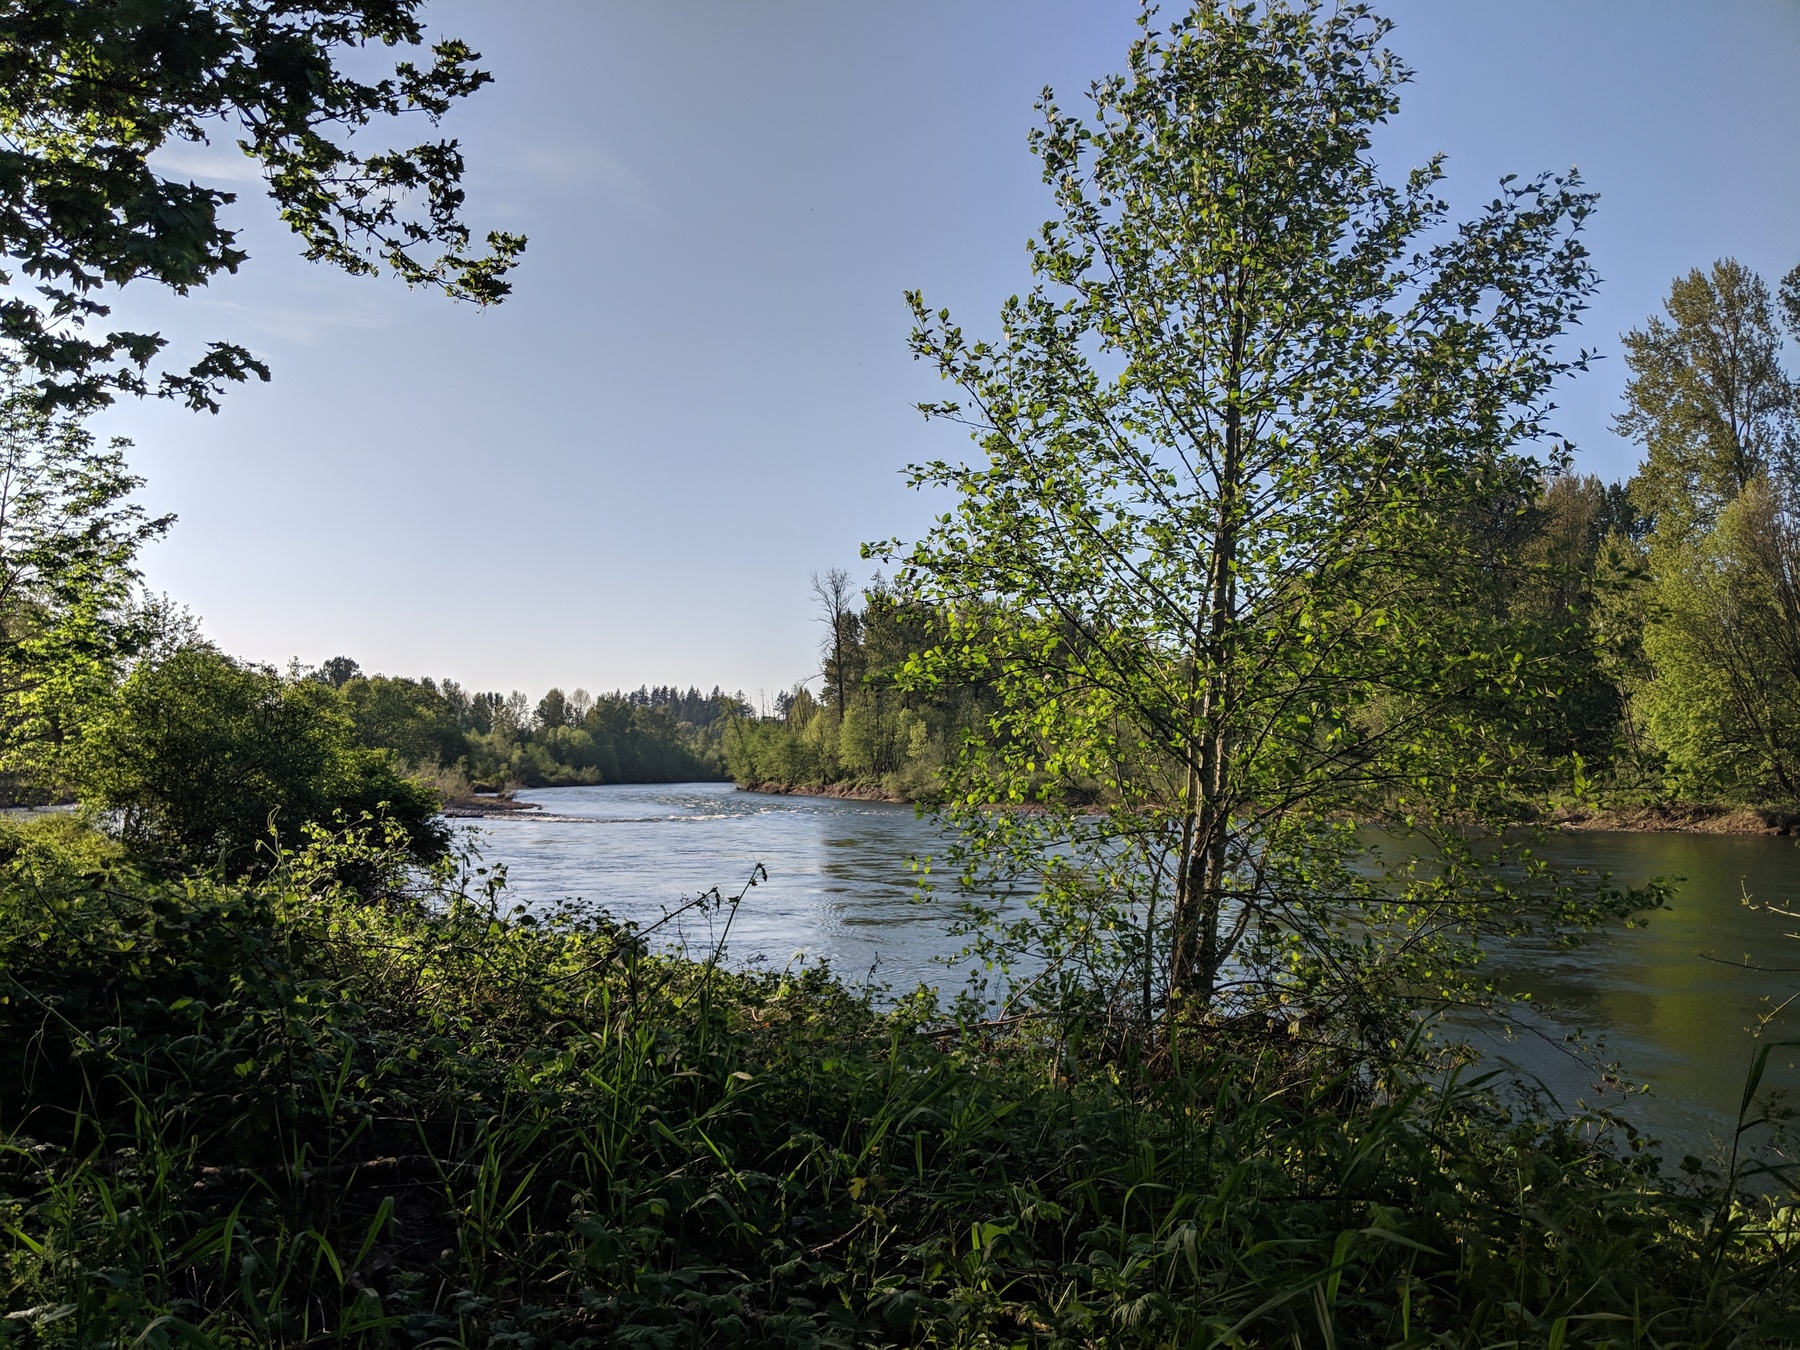 A view of the McKenzie River from shore with greenery on both sides of the bank